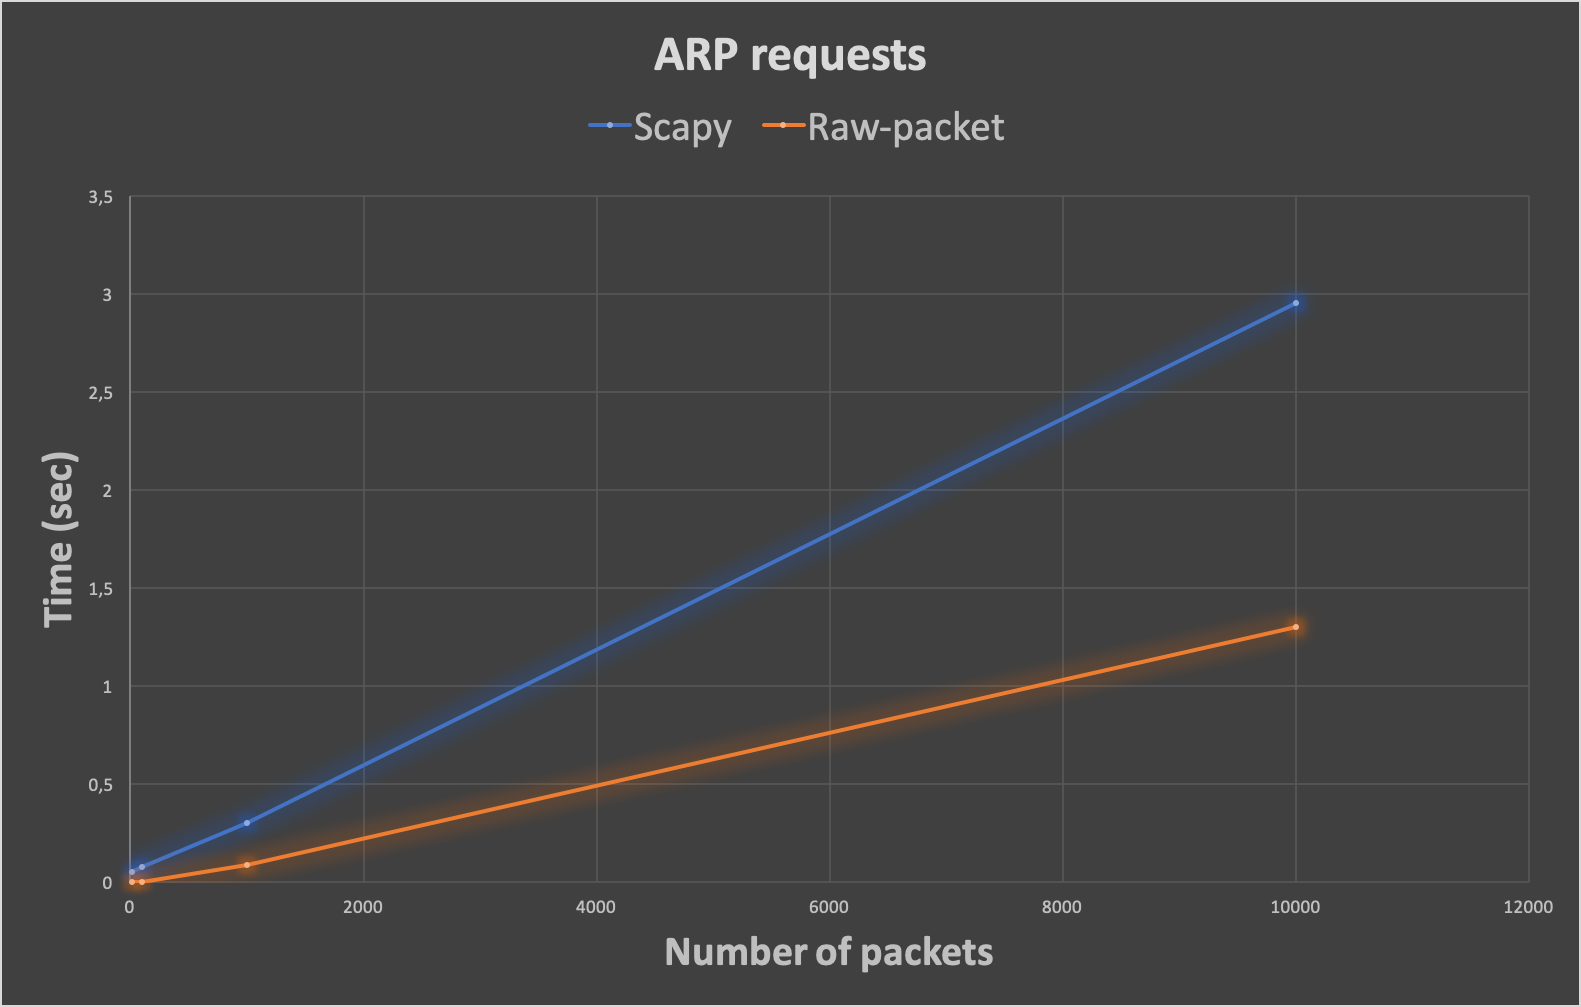 Scapy vs. Raw-packet ARP requests